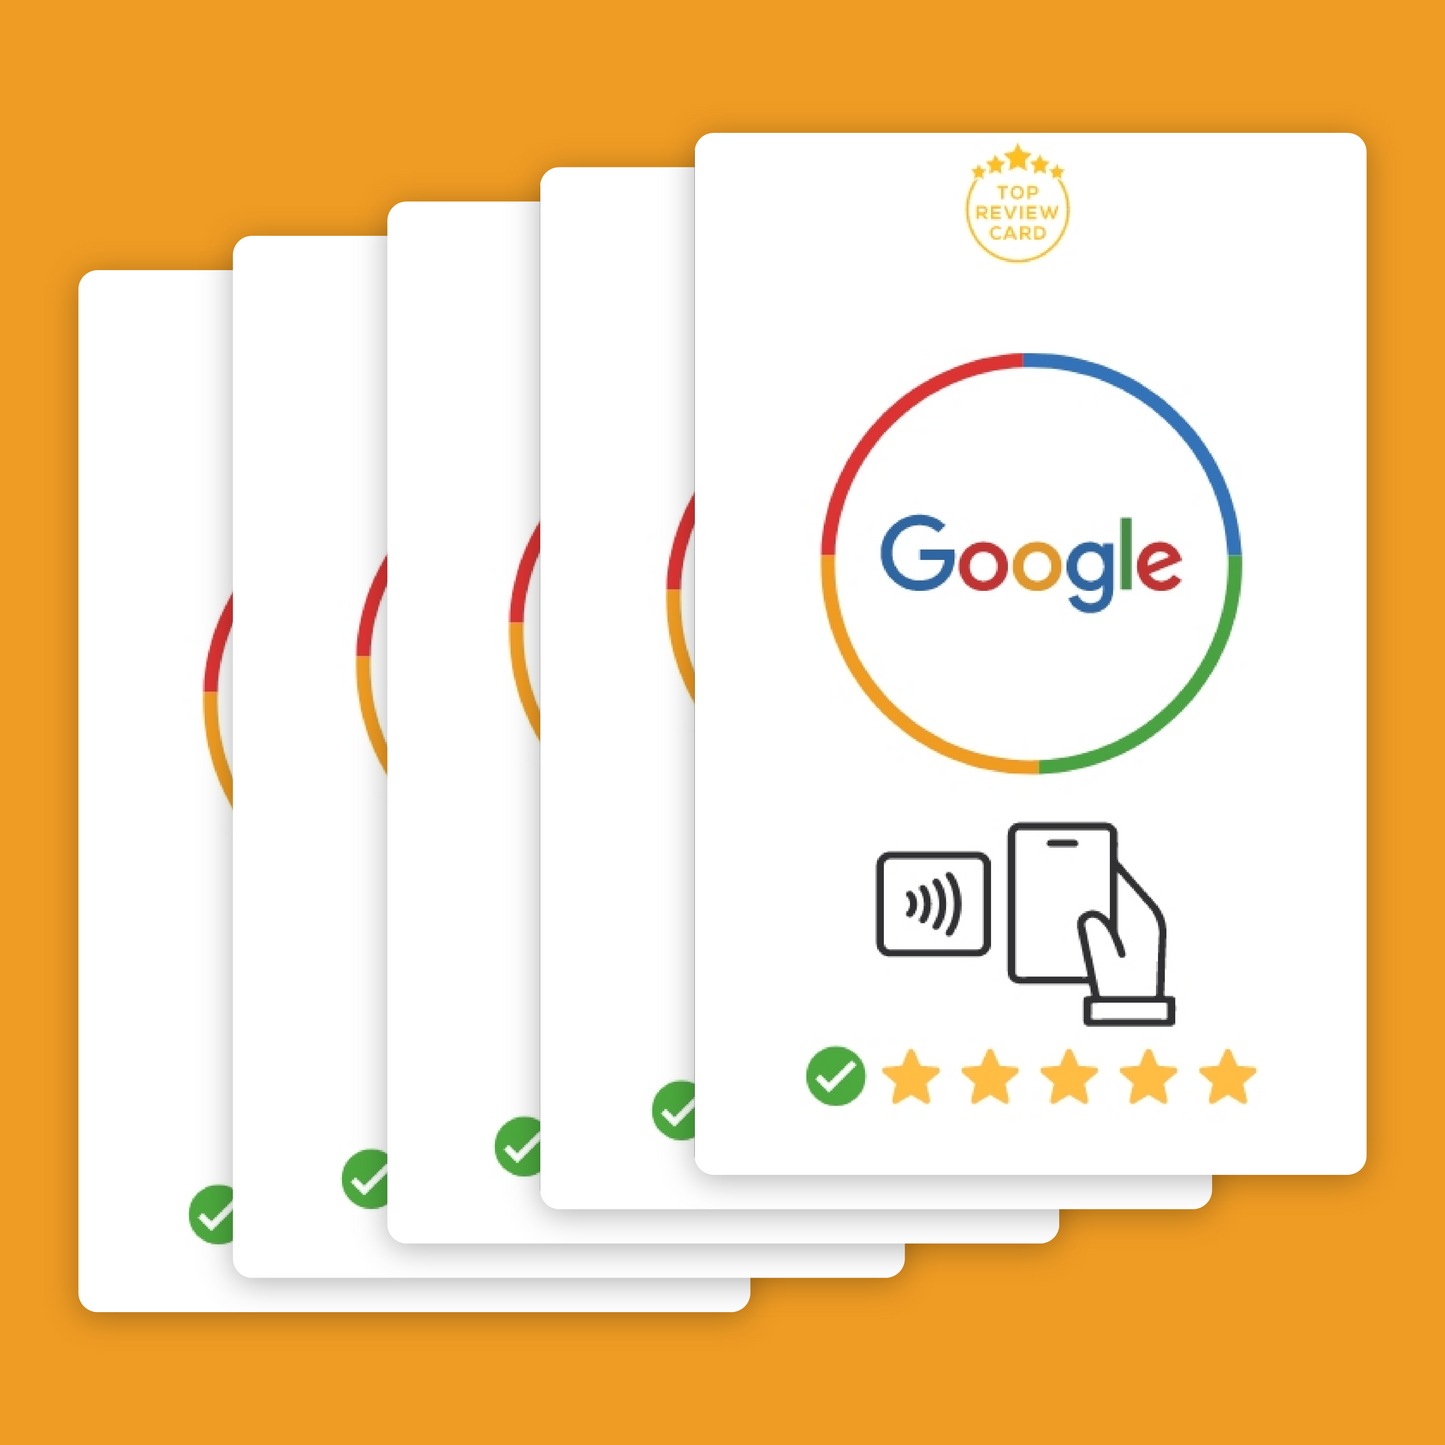 Elevate Your Online Reputation Elevate your online reputation with our Google Review Cards. Turn positive feedback into powerful marketing tools, driving conversions and bolstering your brand's credibility.